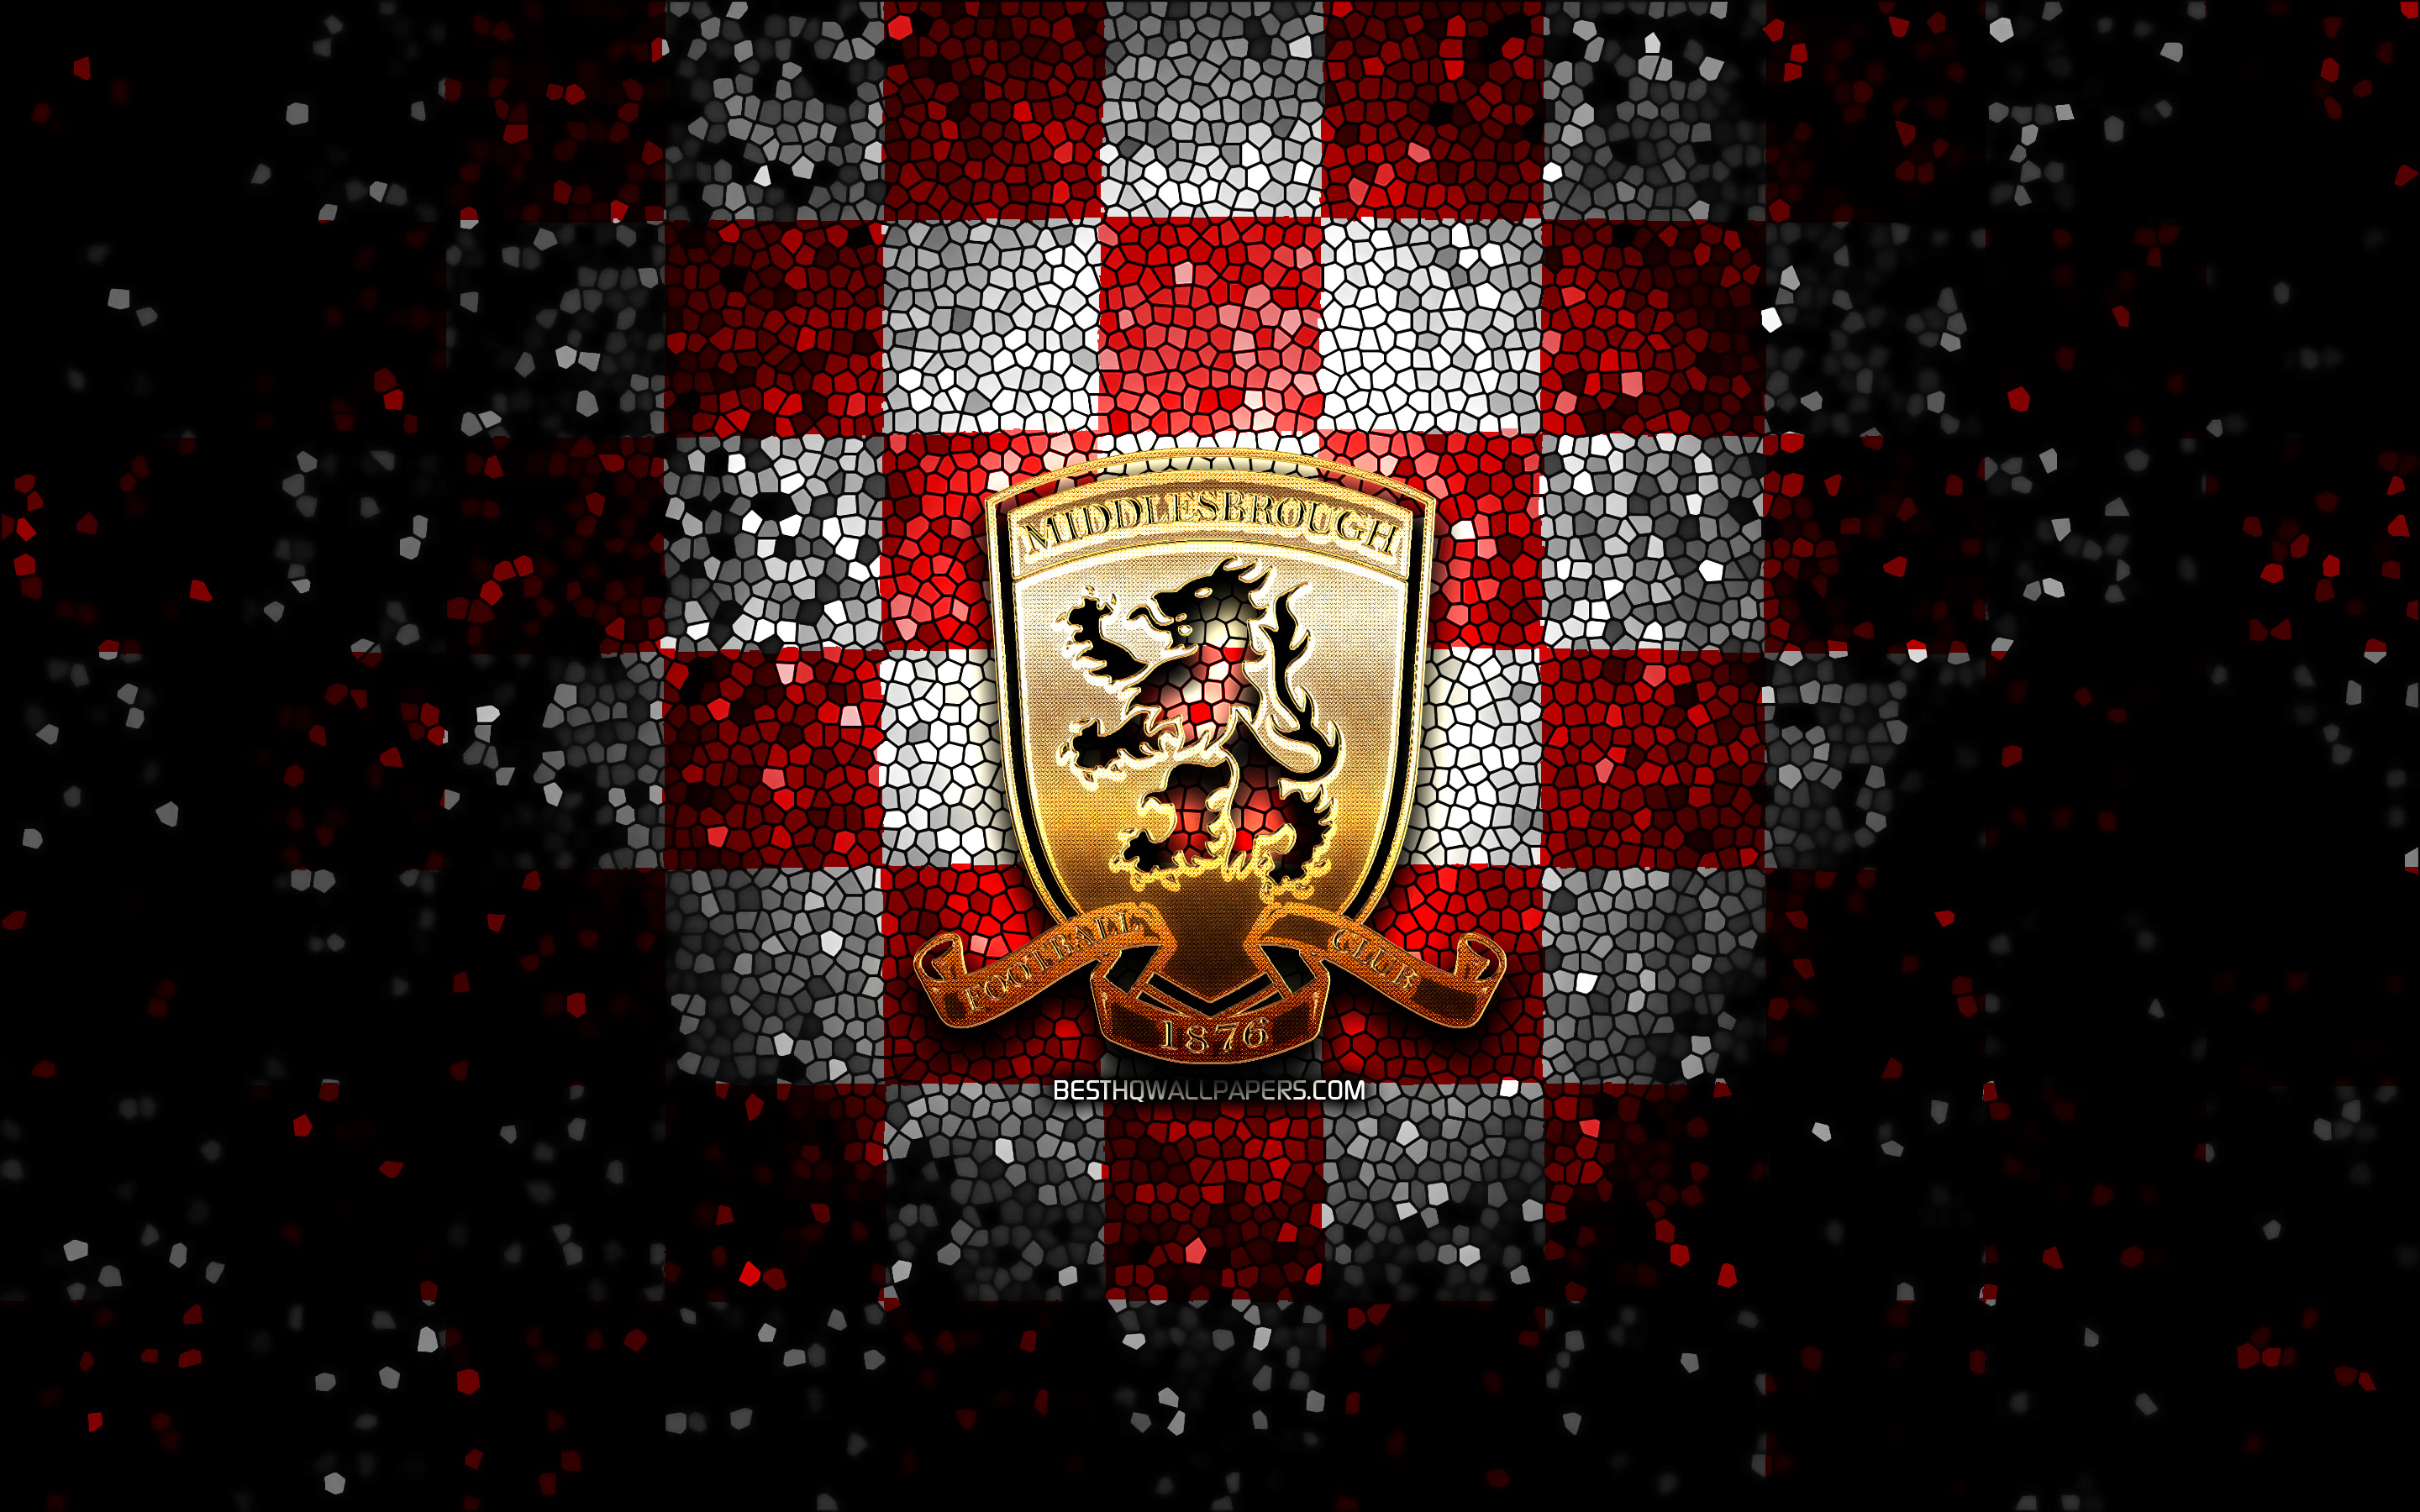 Download wallpaper Middlesbrough FC, glitter logo, EFL Championship, red white checkered background, soccer, english football club, Middlesbrough logo, mosaic art, football, Middlesbrough for desktop with resolution 2880x1800. High Quality HD picture